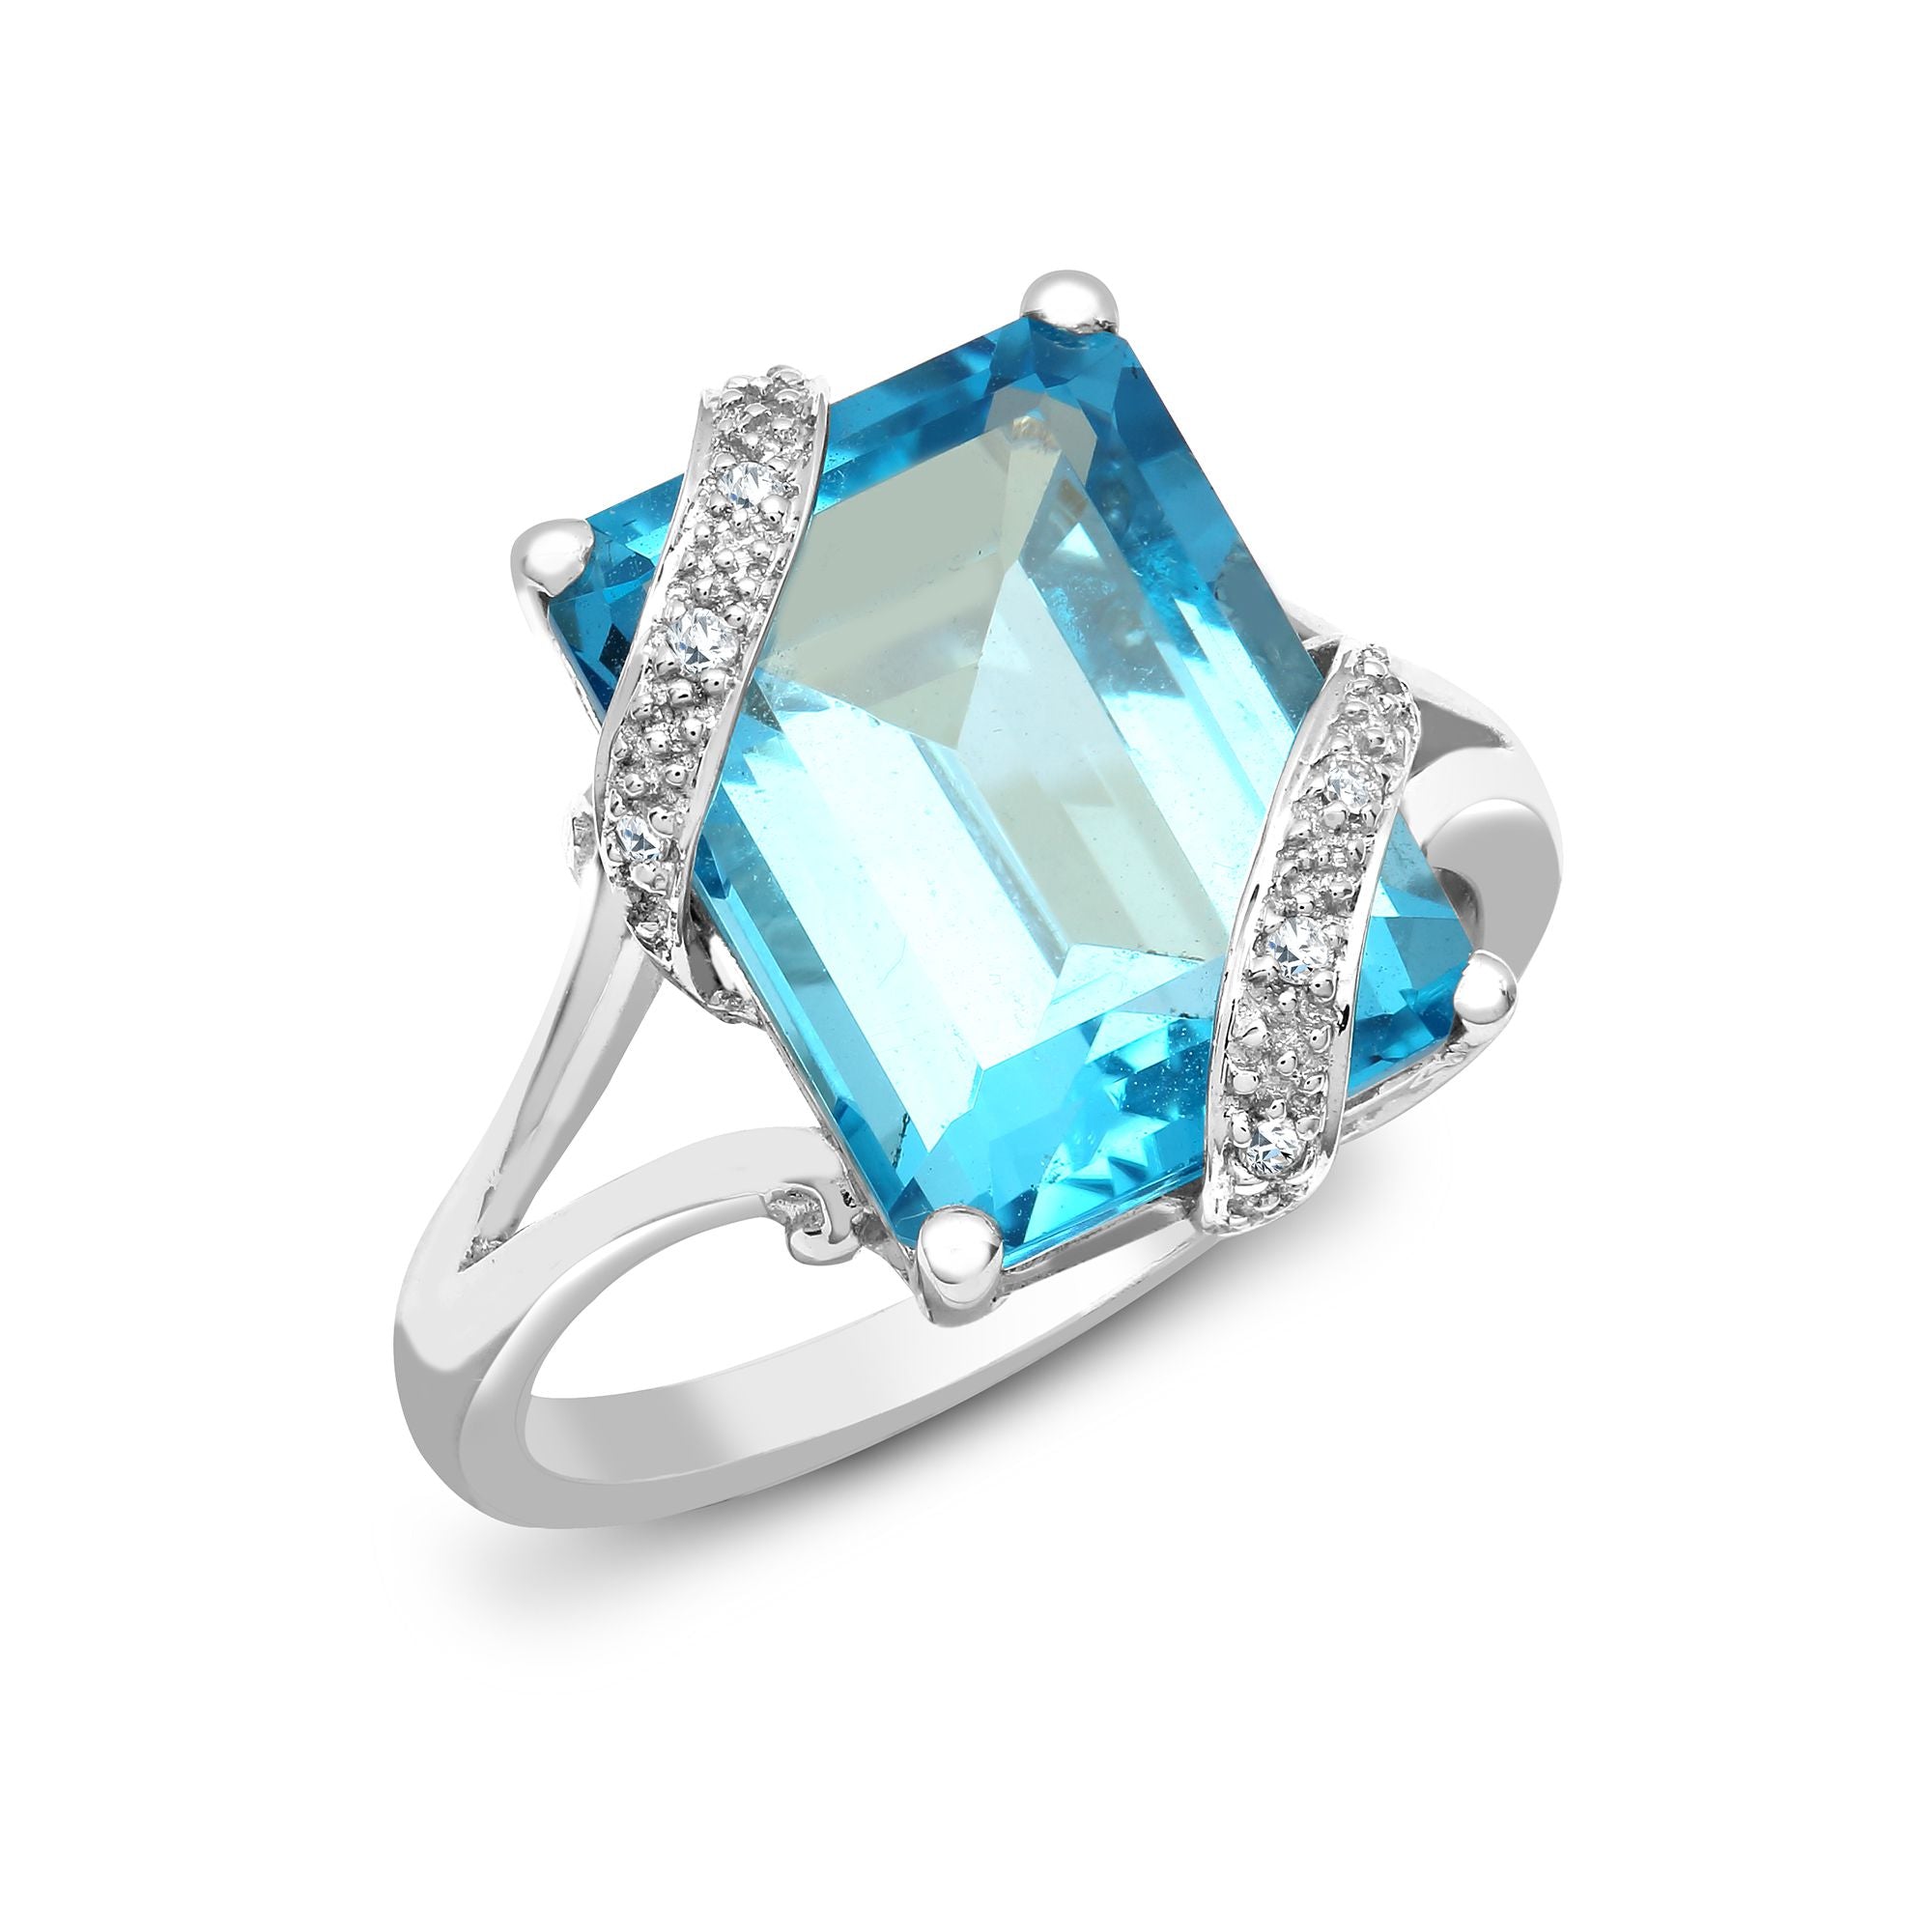 18R605-O | 18ct White Gold Diamond And Blue Topaz Ring